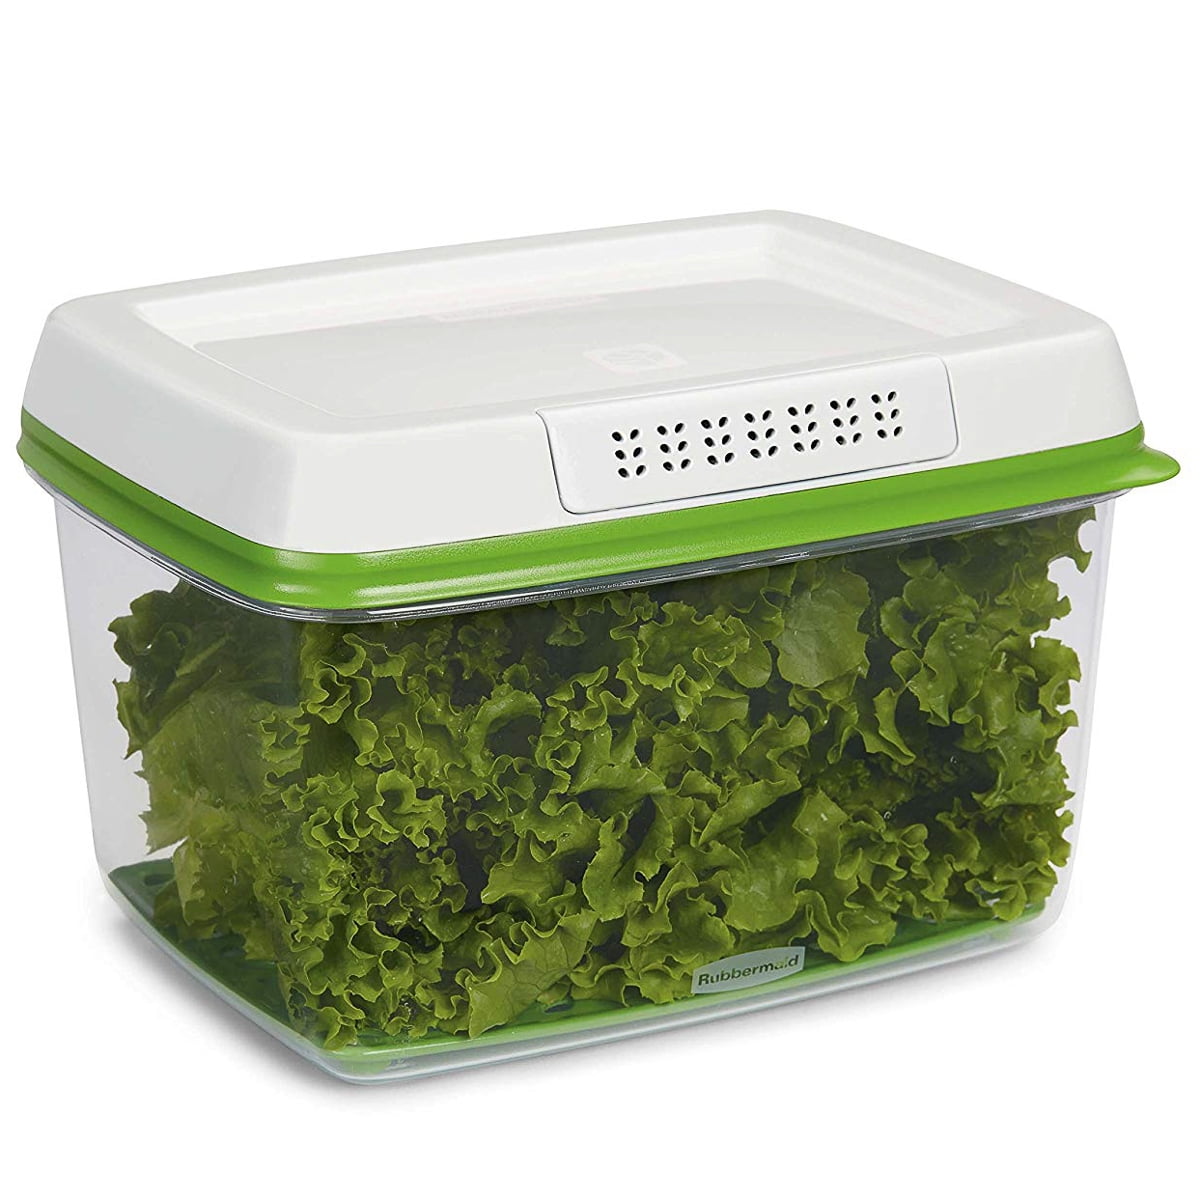 The Rubbermaid FreshWorks Produce Savers Are 30% Off at